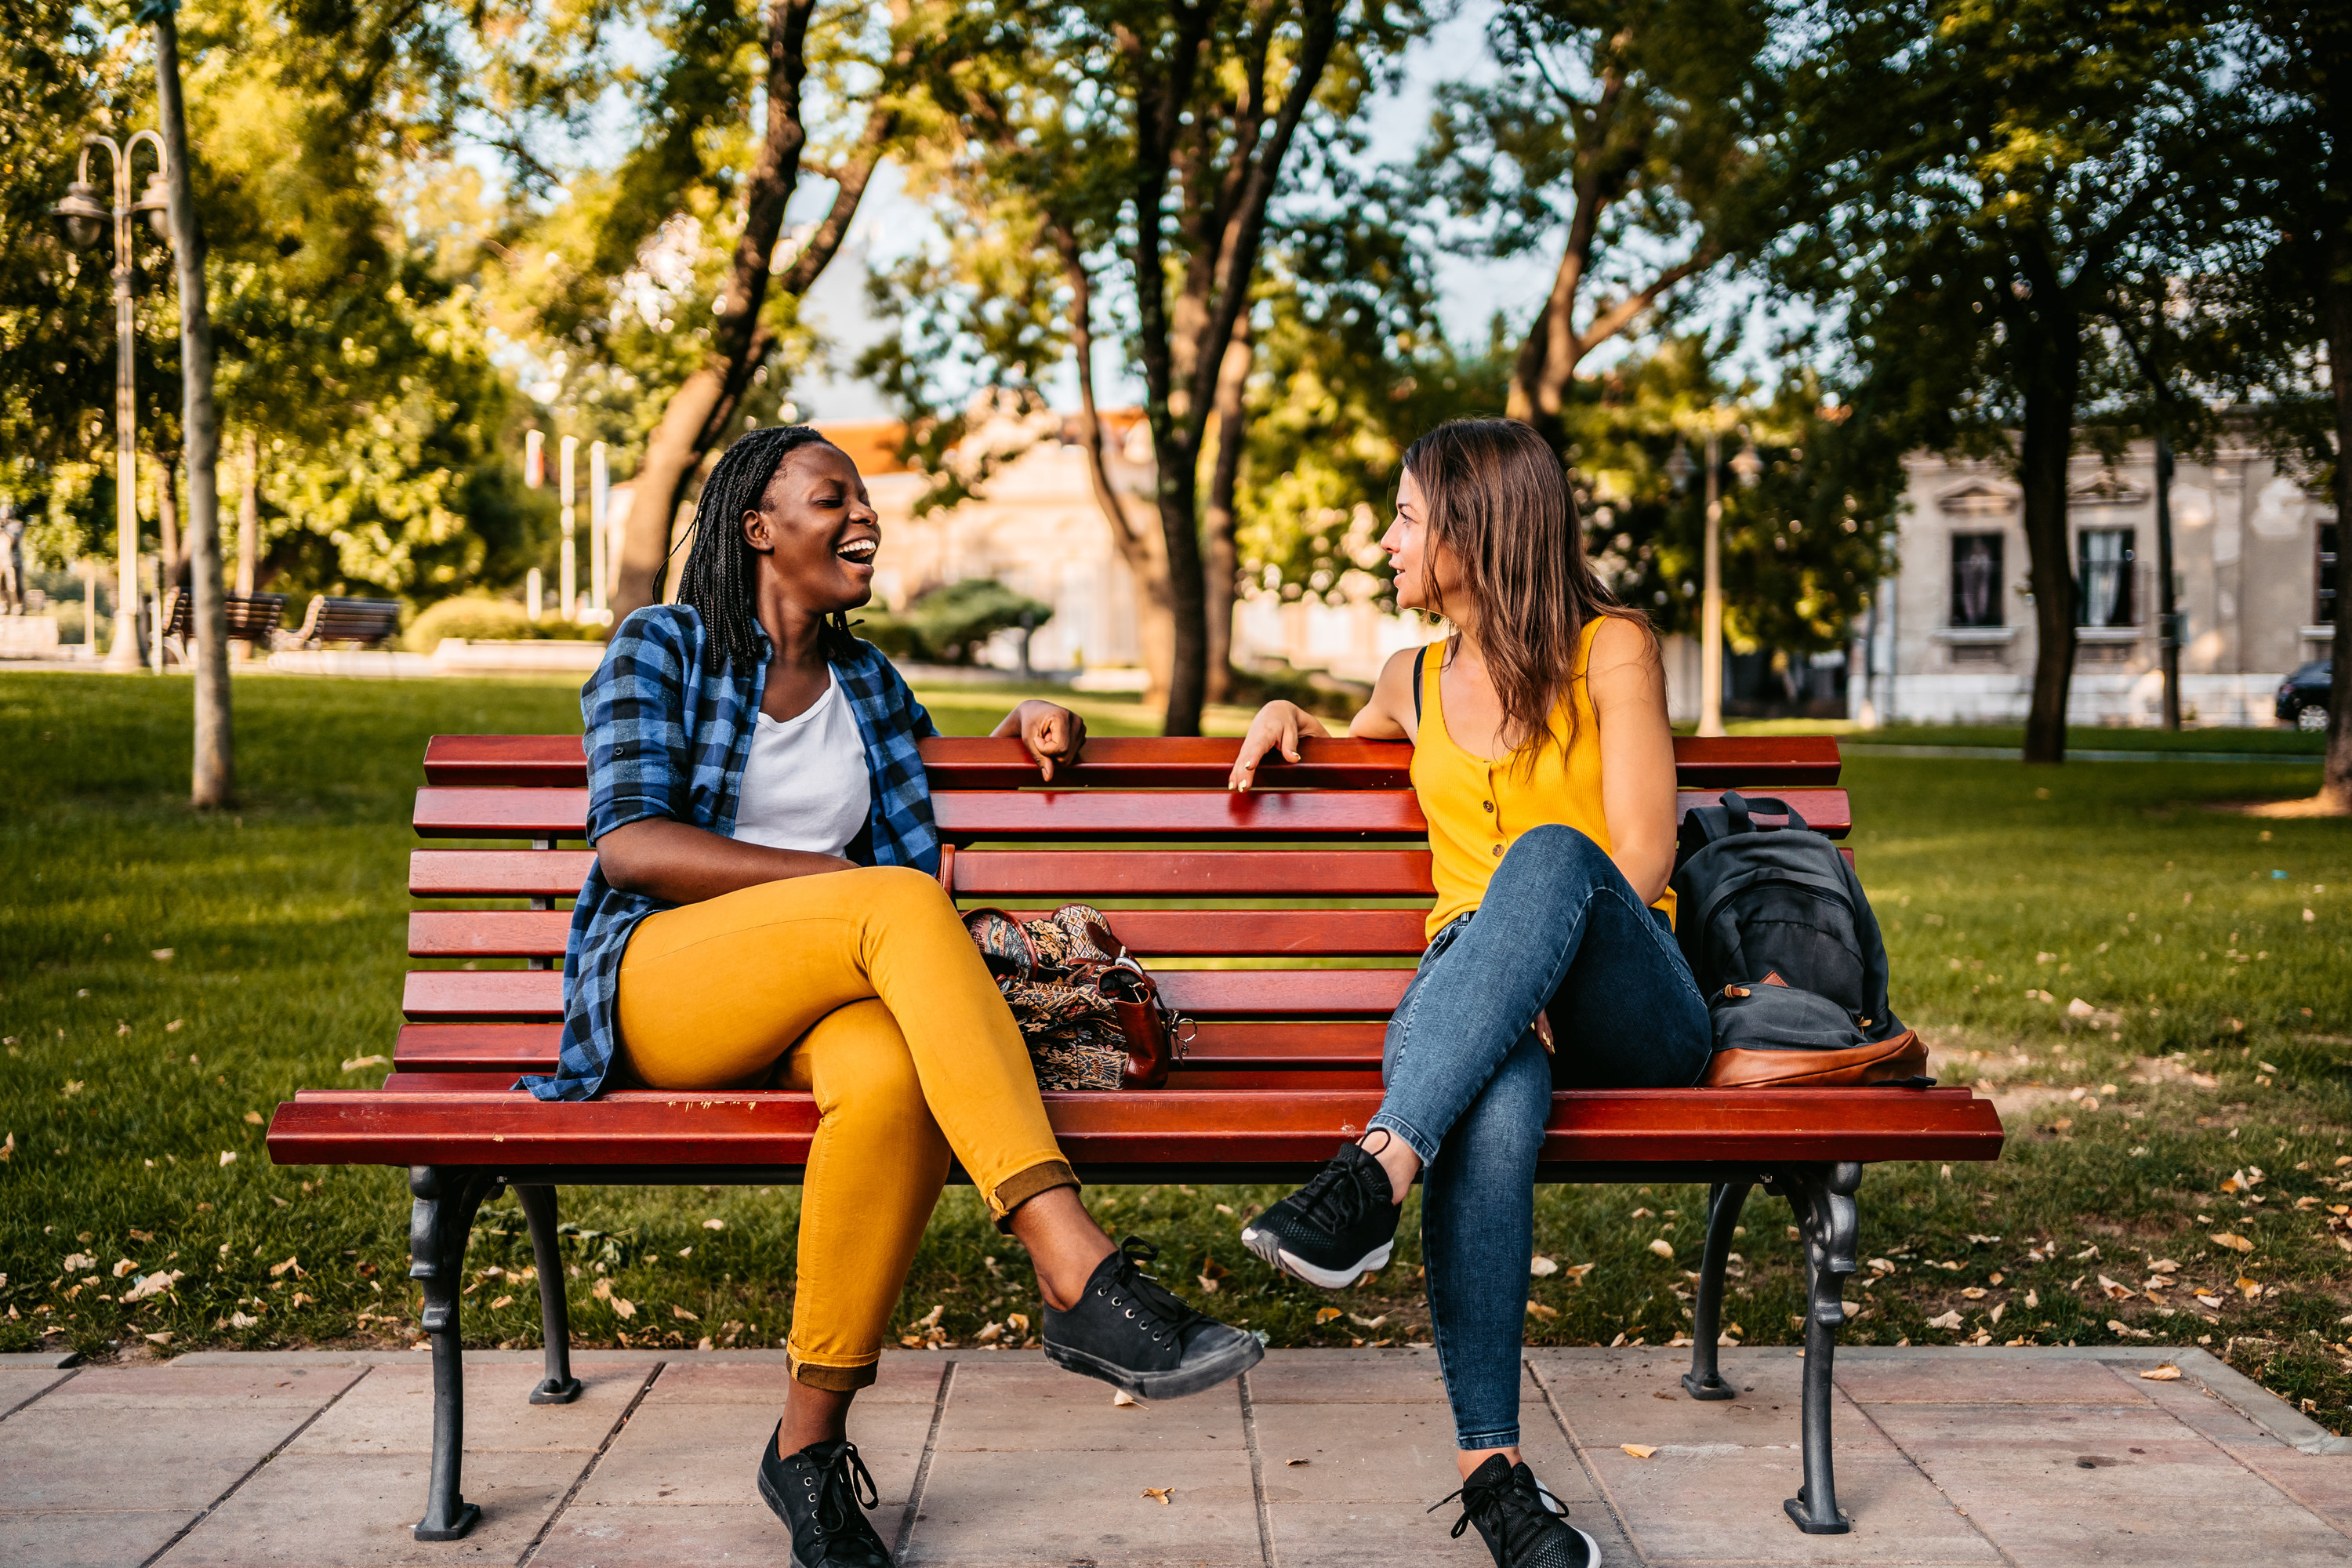 Two women sitting on an outdoor bench talking to each other